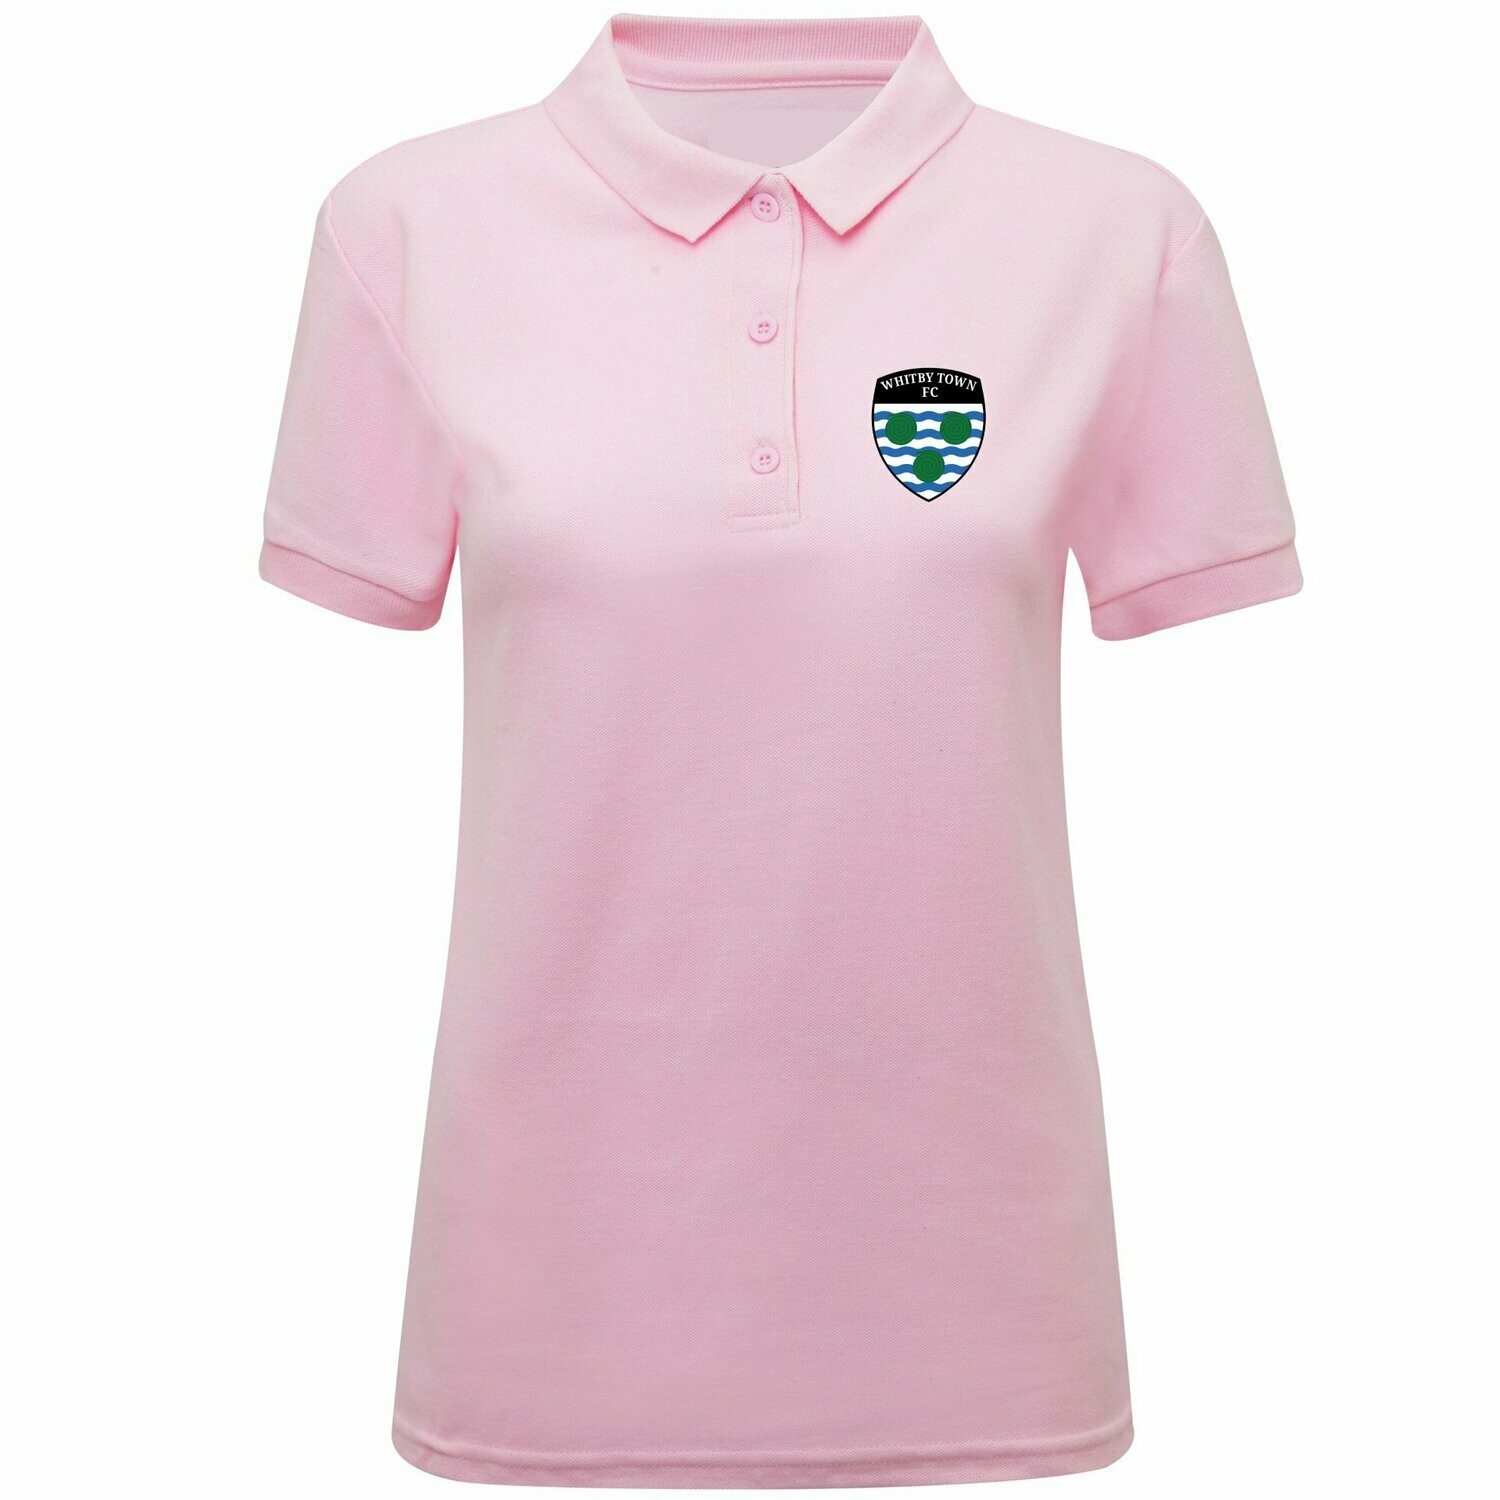 Adult's Whitby Town FC Polo (Pink)